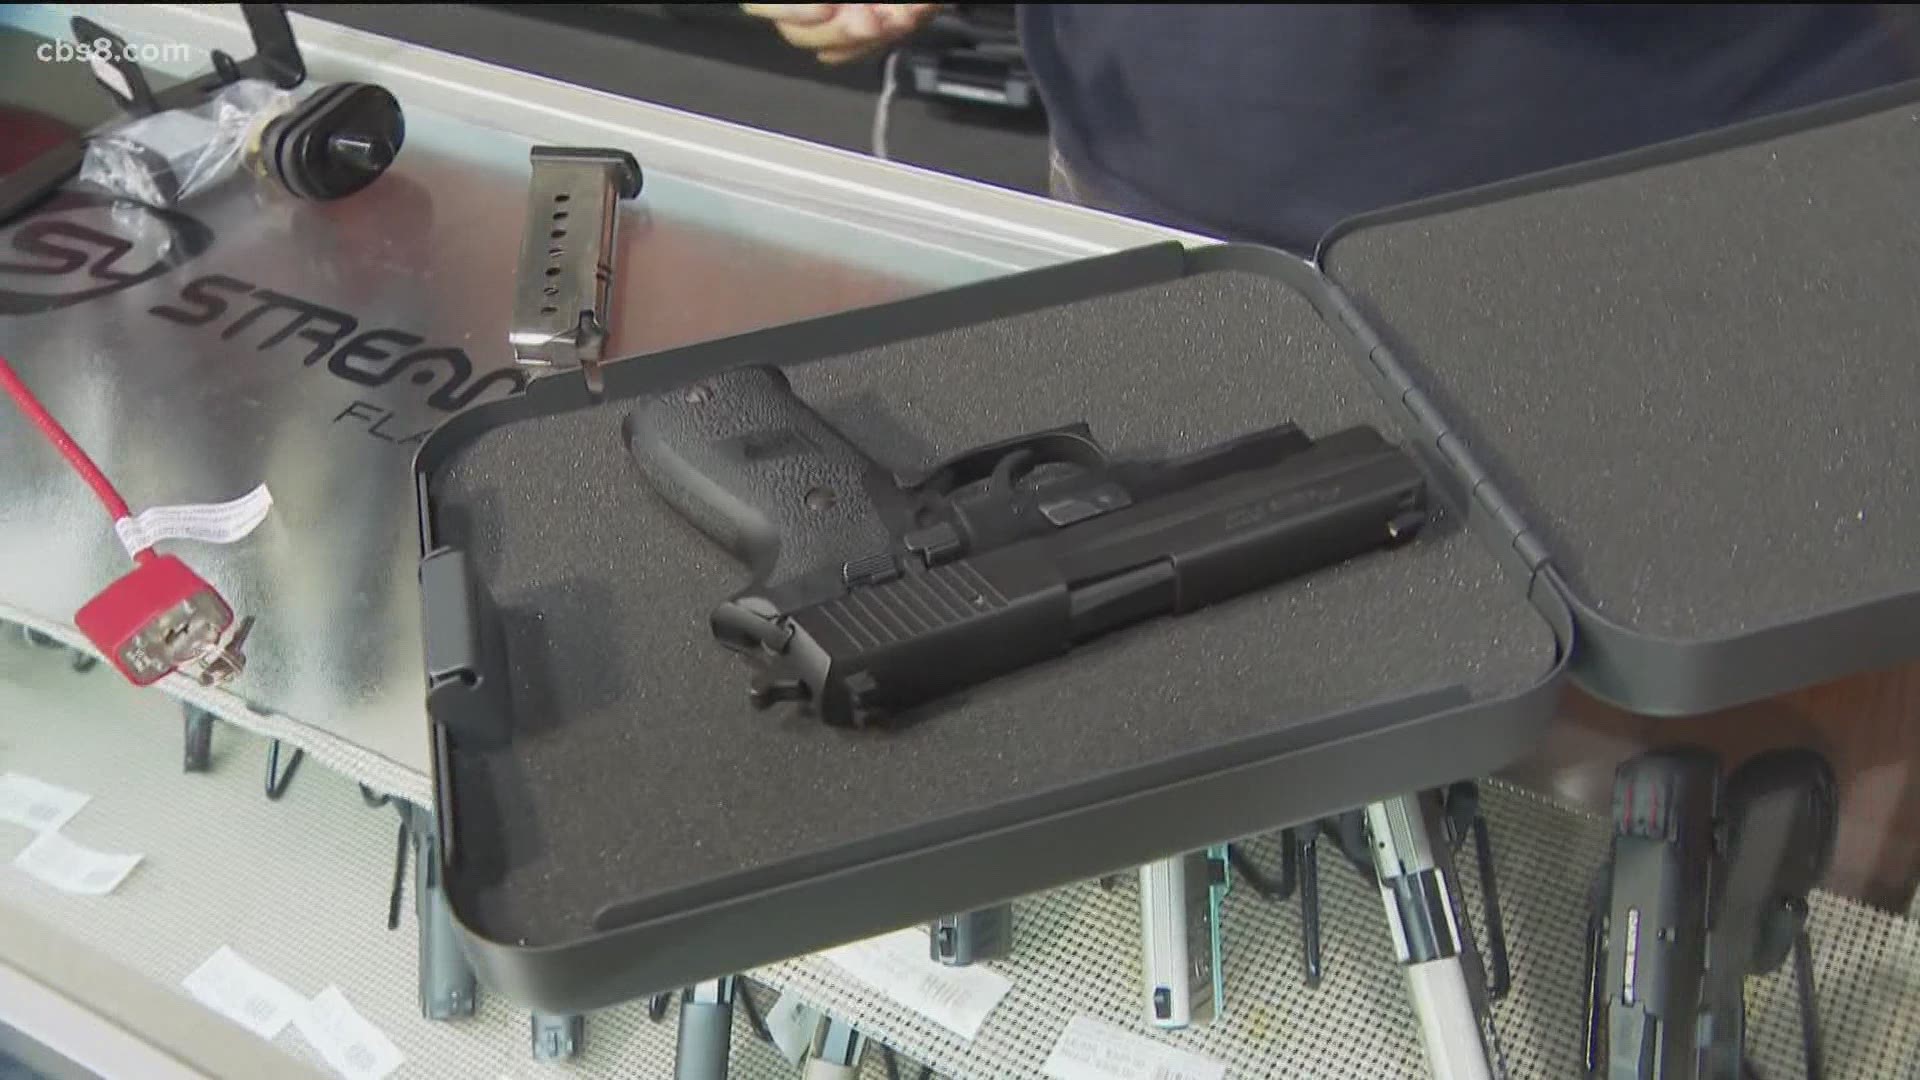 The City Attorney's Office says the gun violence restraining order program has removed more than 600 firearms from dangerous users since its inception in 2017.